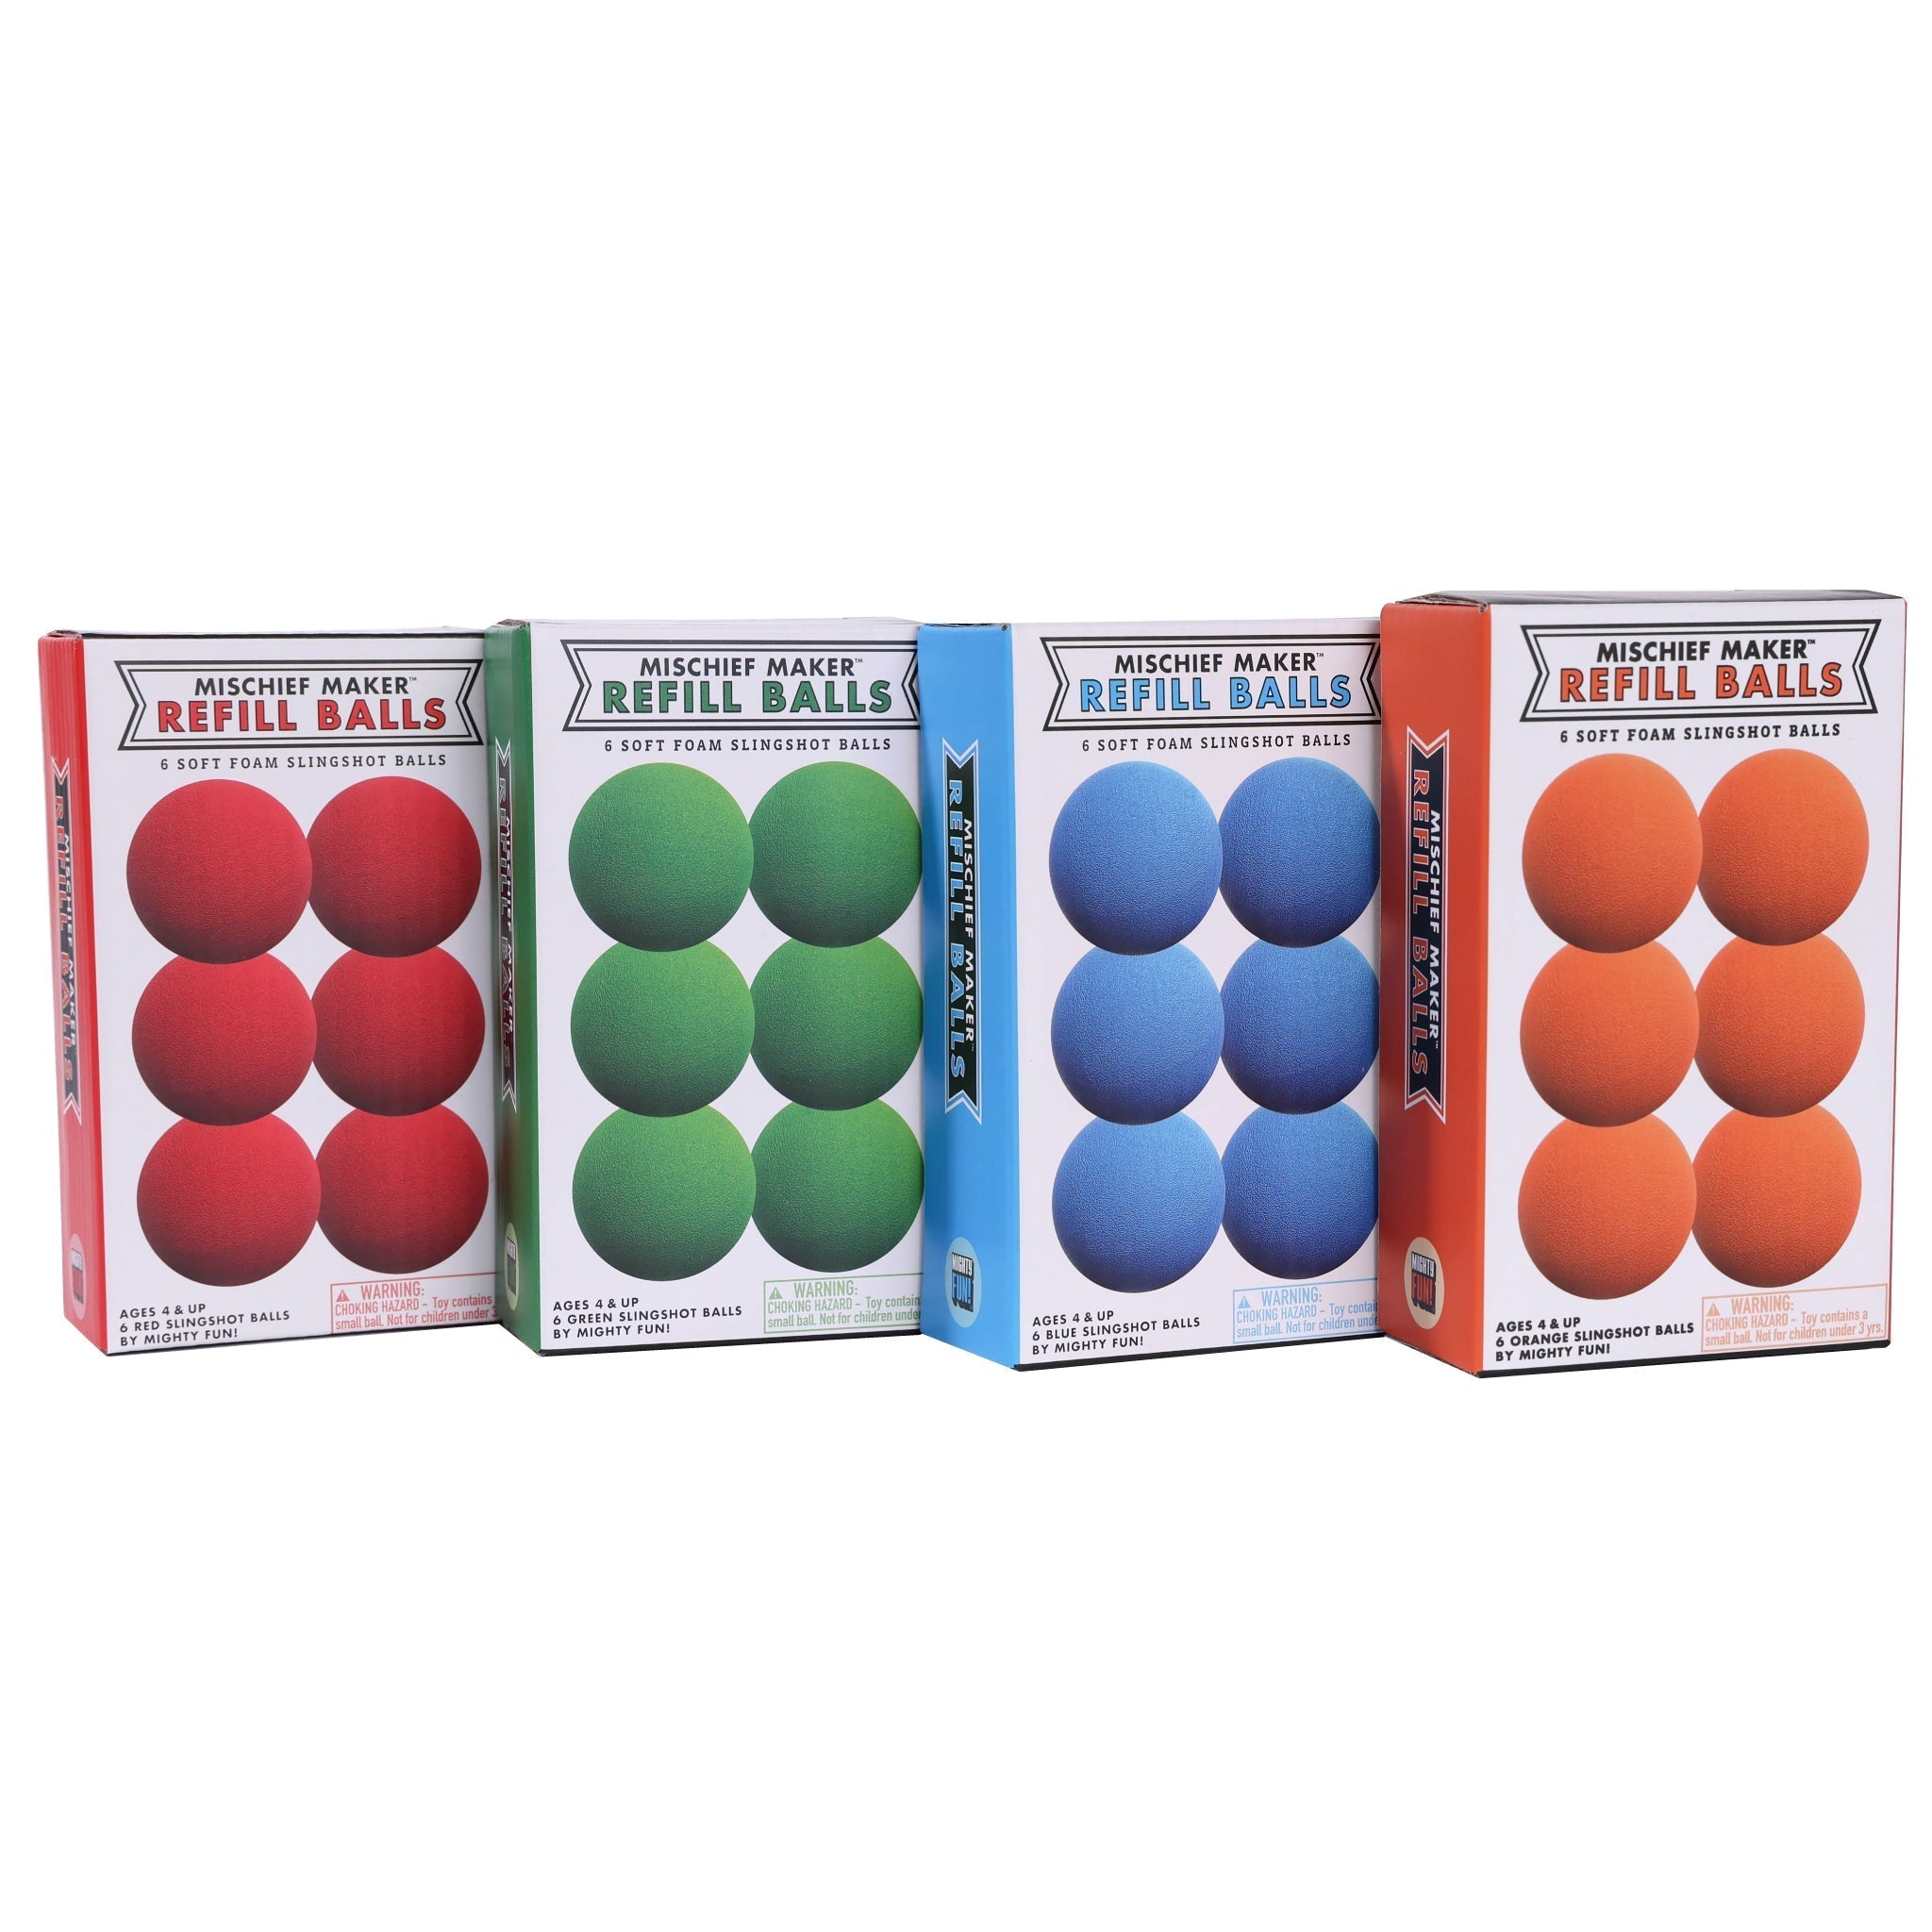 Foam slingshot balls for Mischief Maker toy slingshot by Mighty Fun! Red, green, blue, orange box of 6 balls per pack.